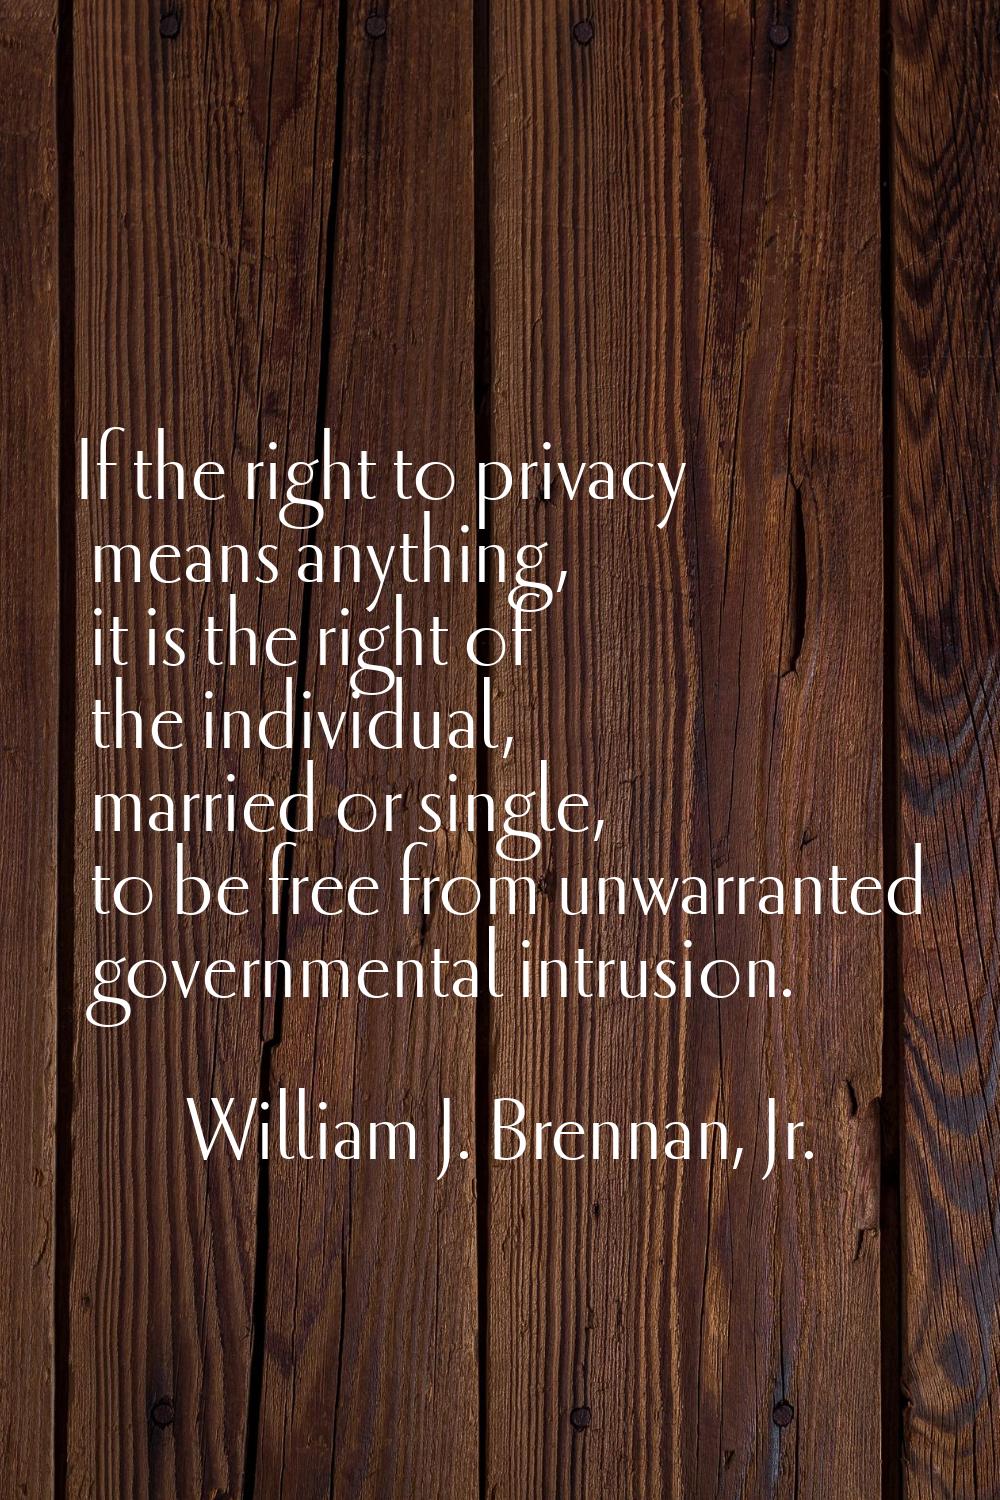 If the right to privacy means anything, it is the right of the individual, married or single, to be